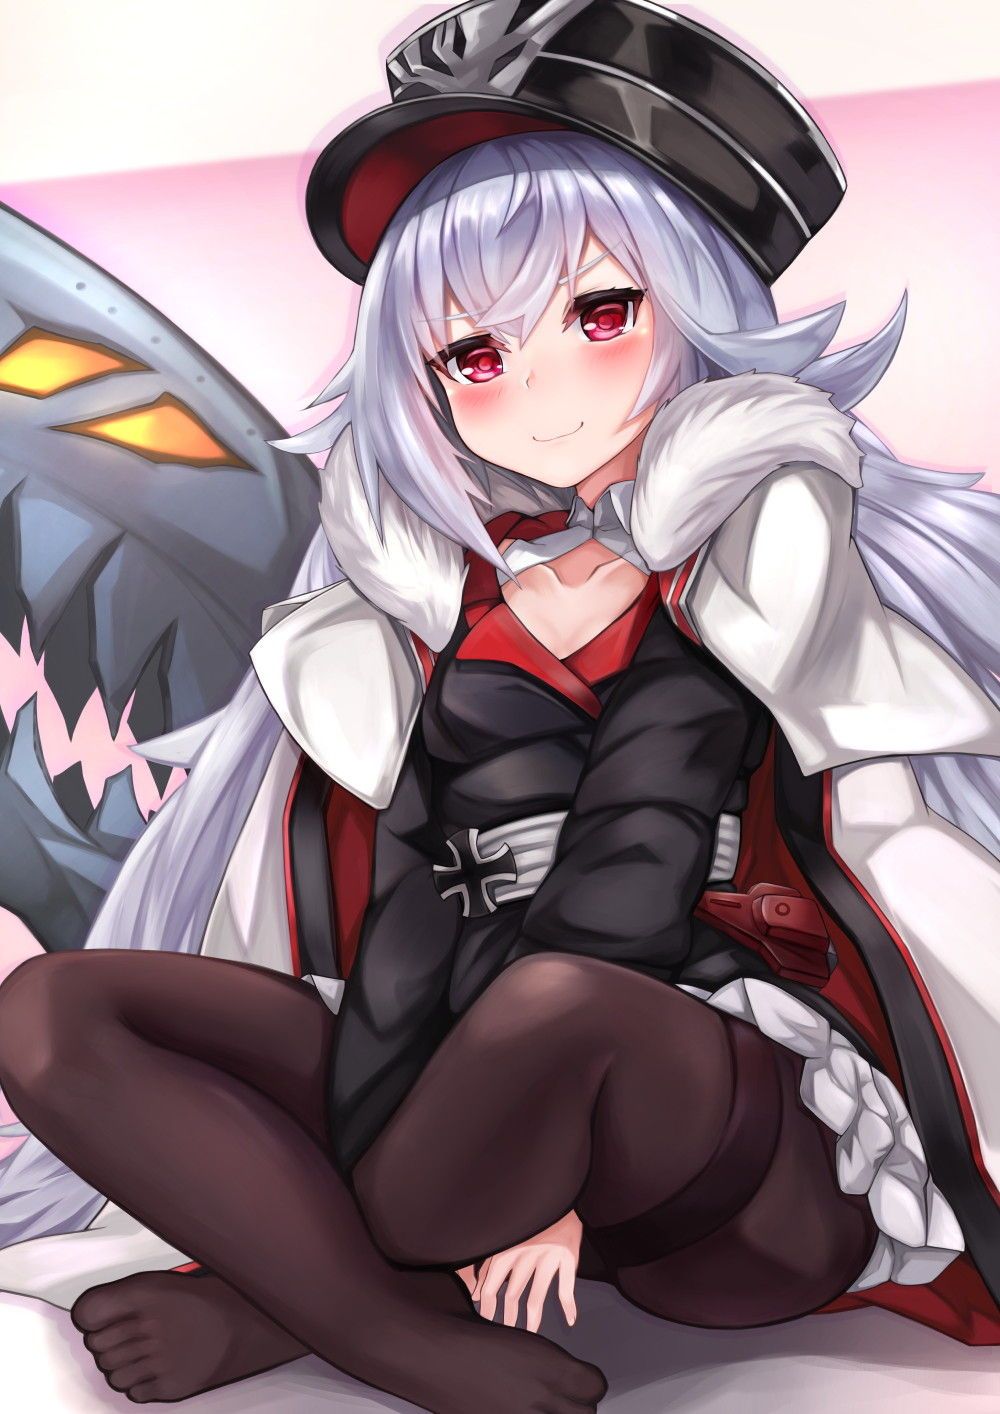 Cute two-dimensional image of Azur Lane. 16